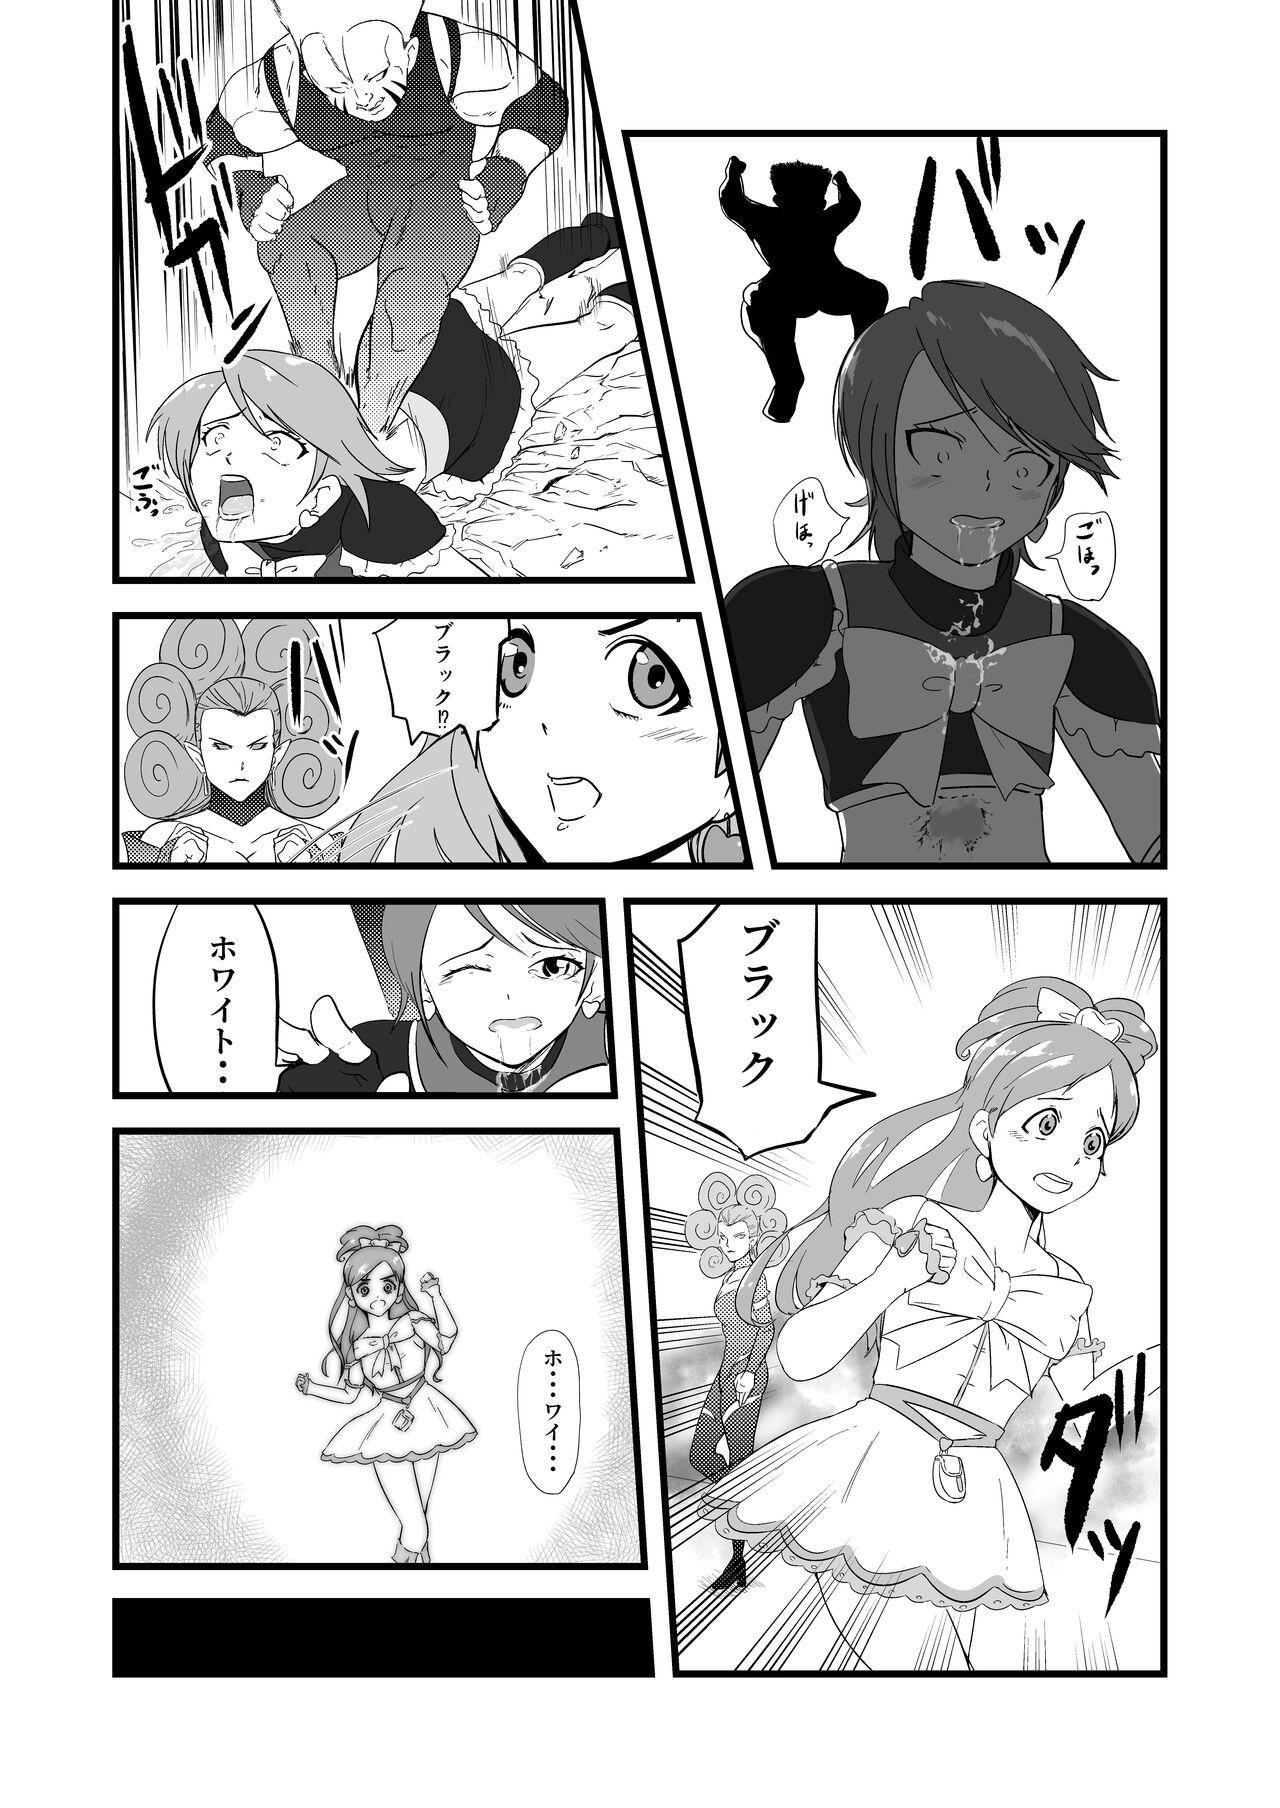 Magrinha Belly Crisis 7 - Pretty cure Pack - Page 4